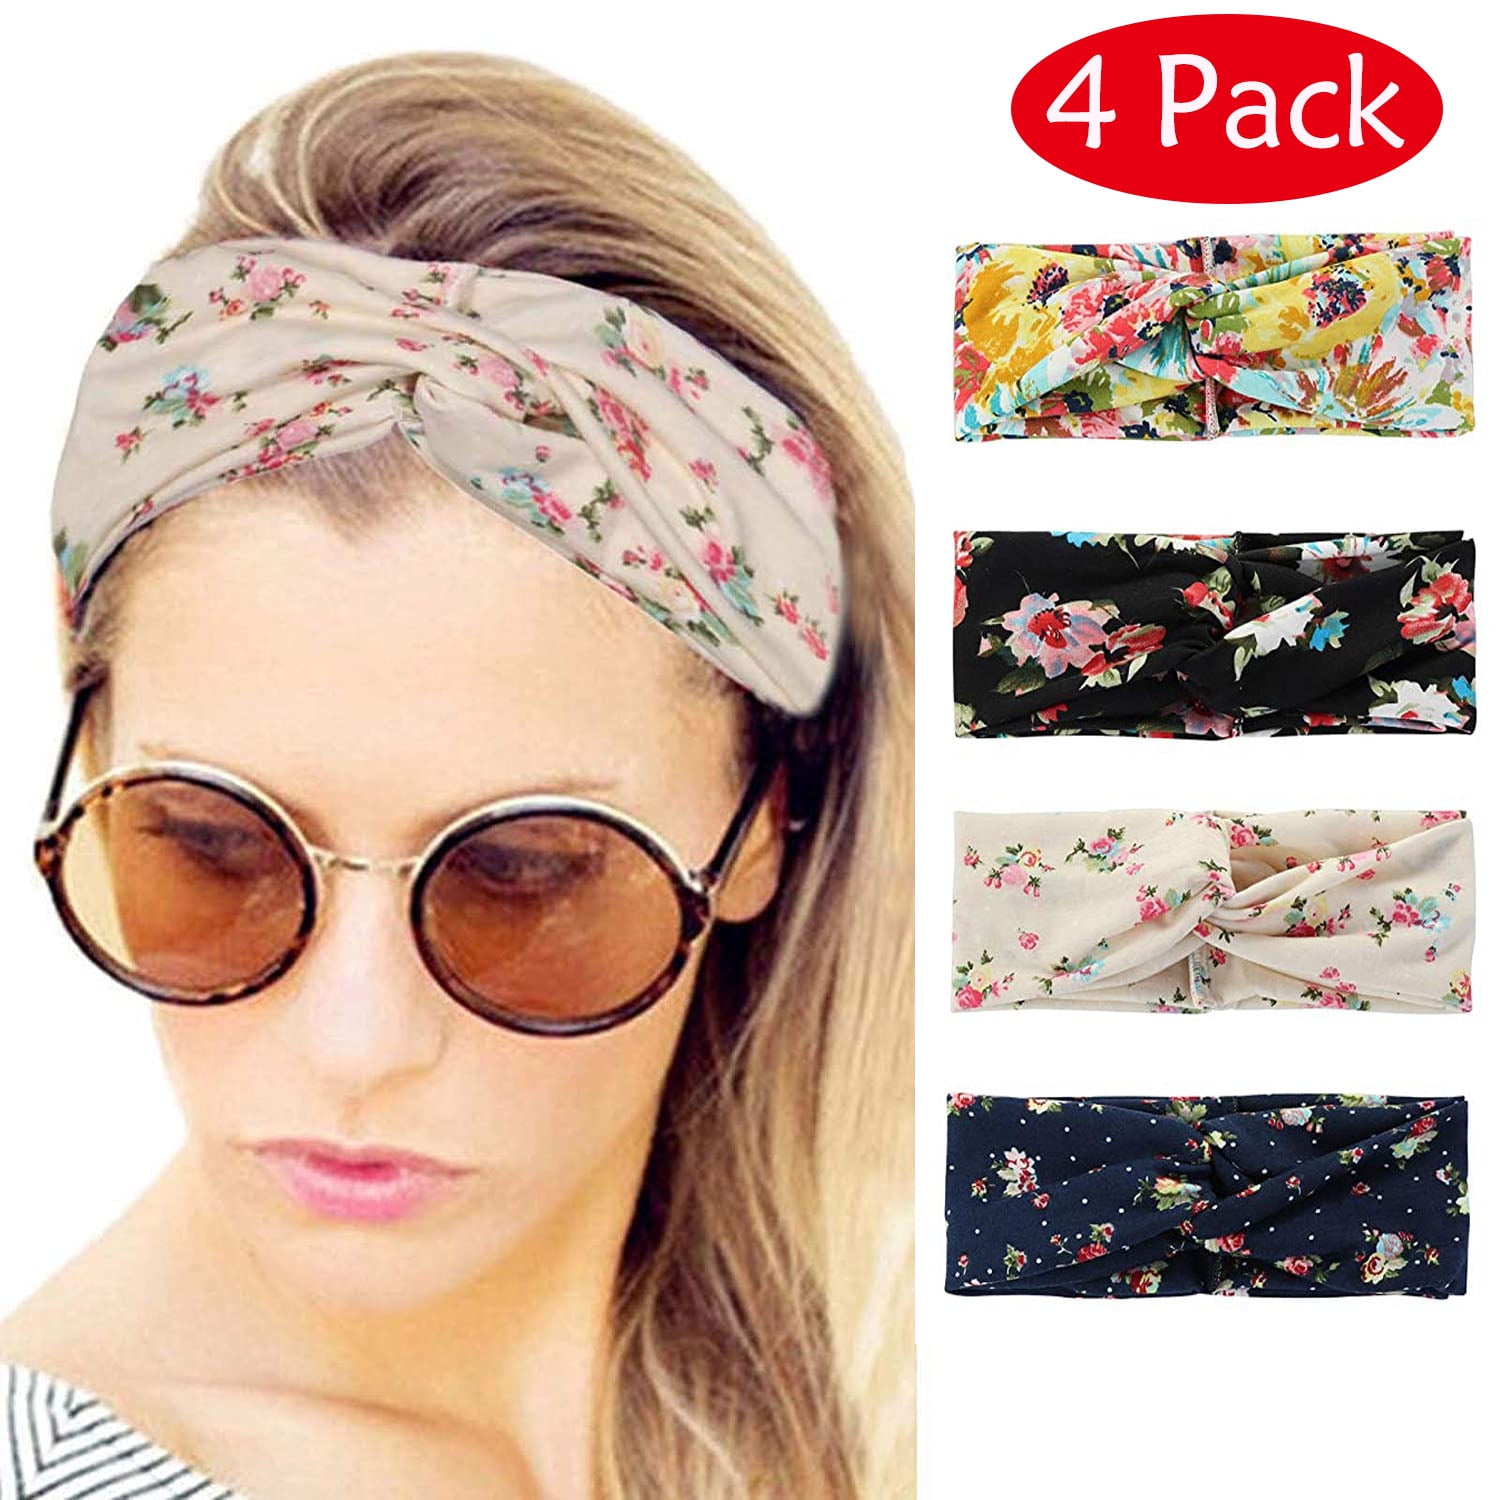 MoKo Headbands for Women 6 Pack Cute Floral Cross Headwrap for Yoga Gym Workout